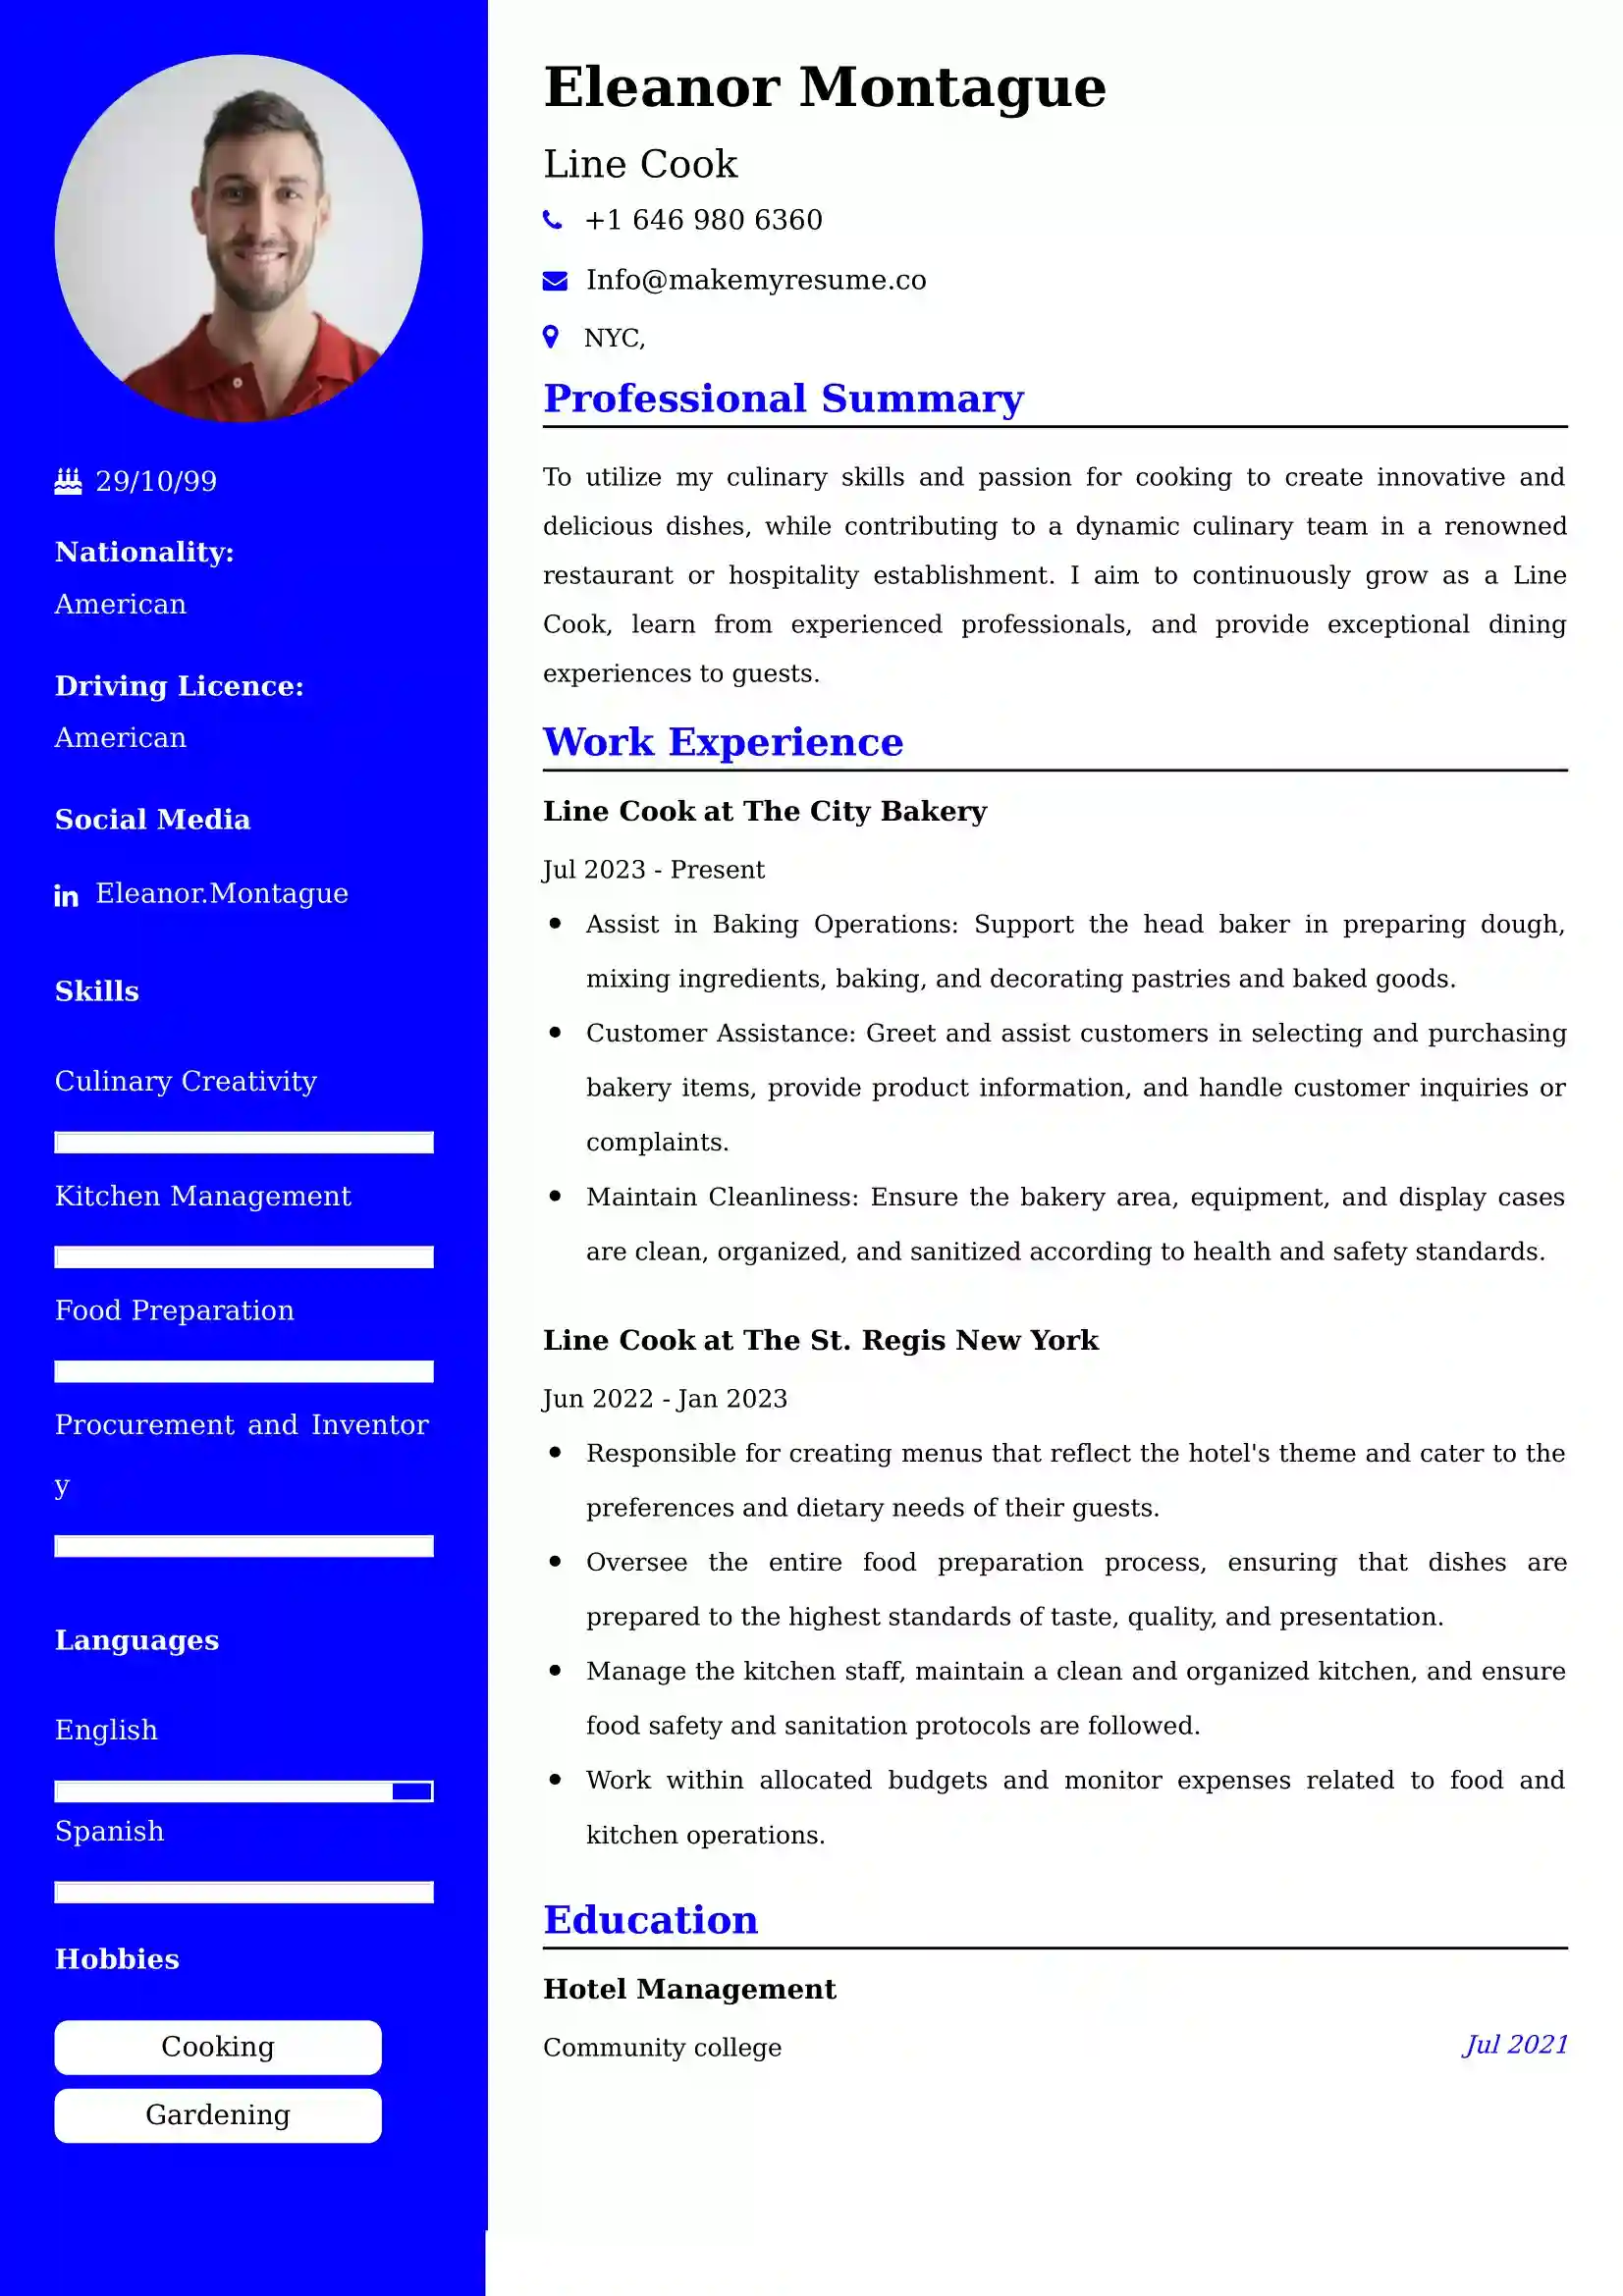 Line Cook Resume Examples - Australian Format and Tips